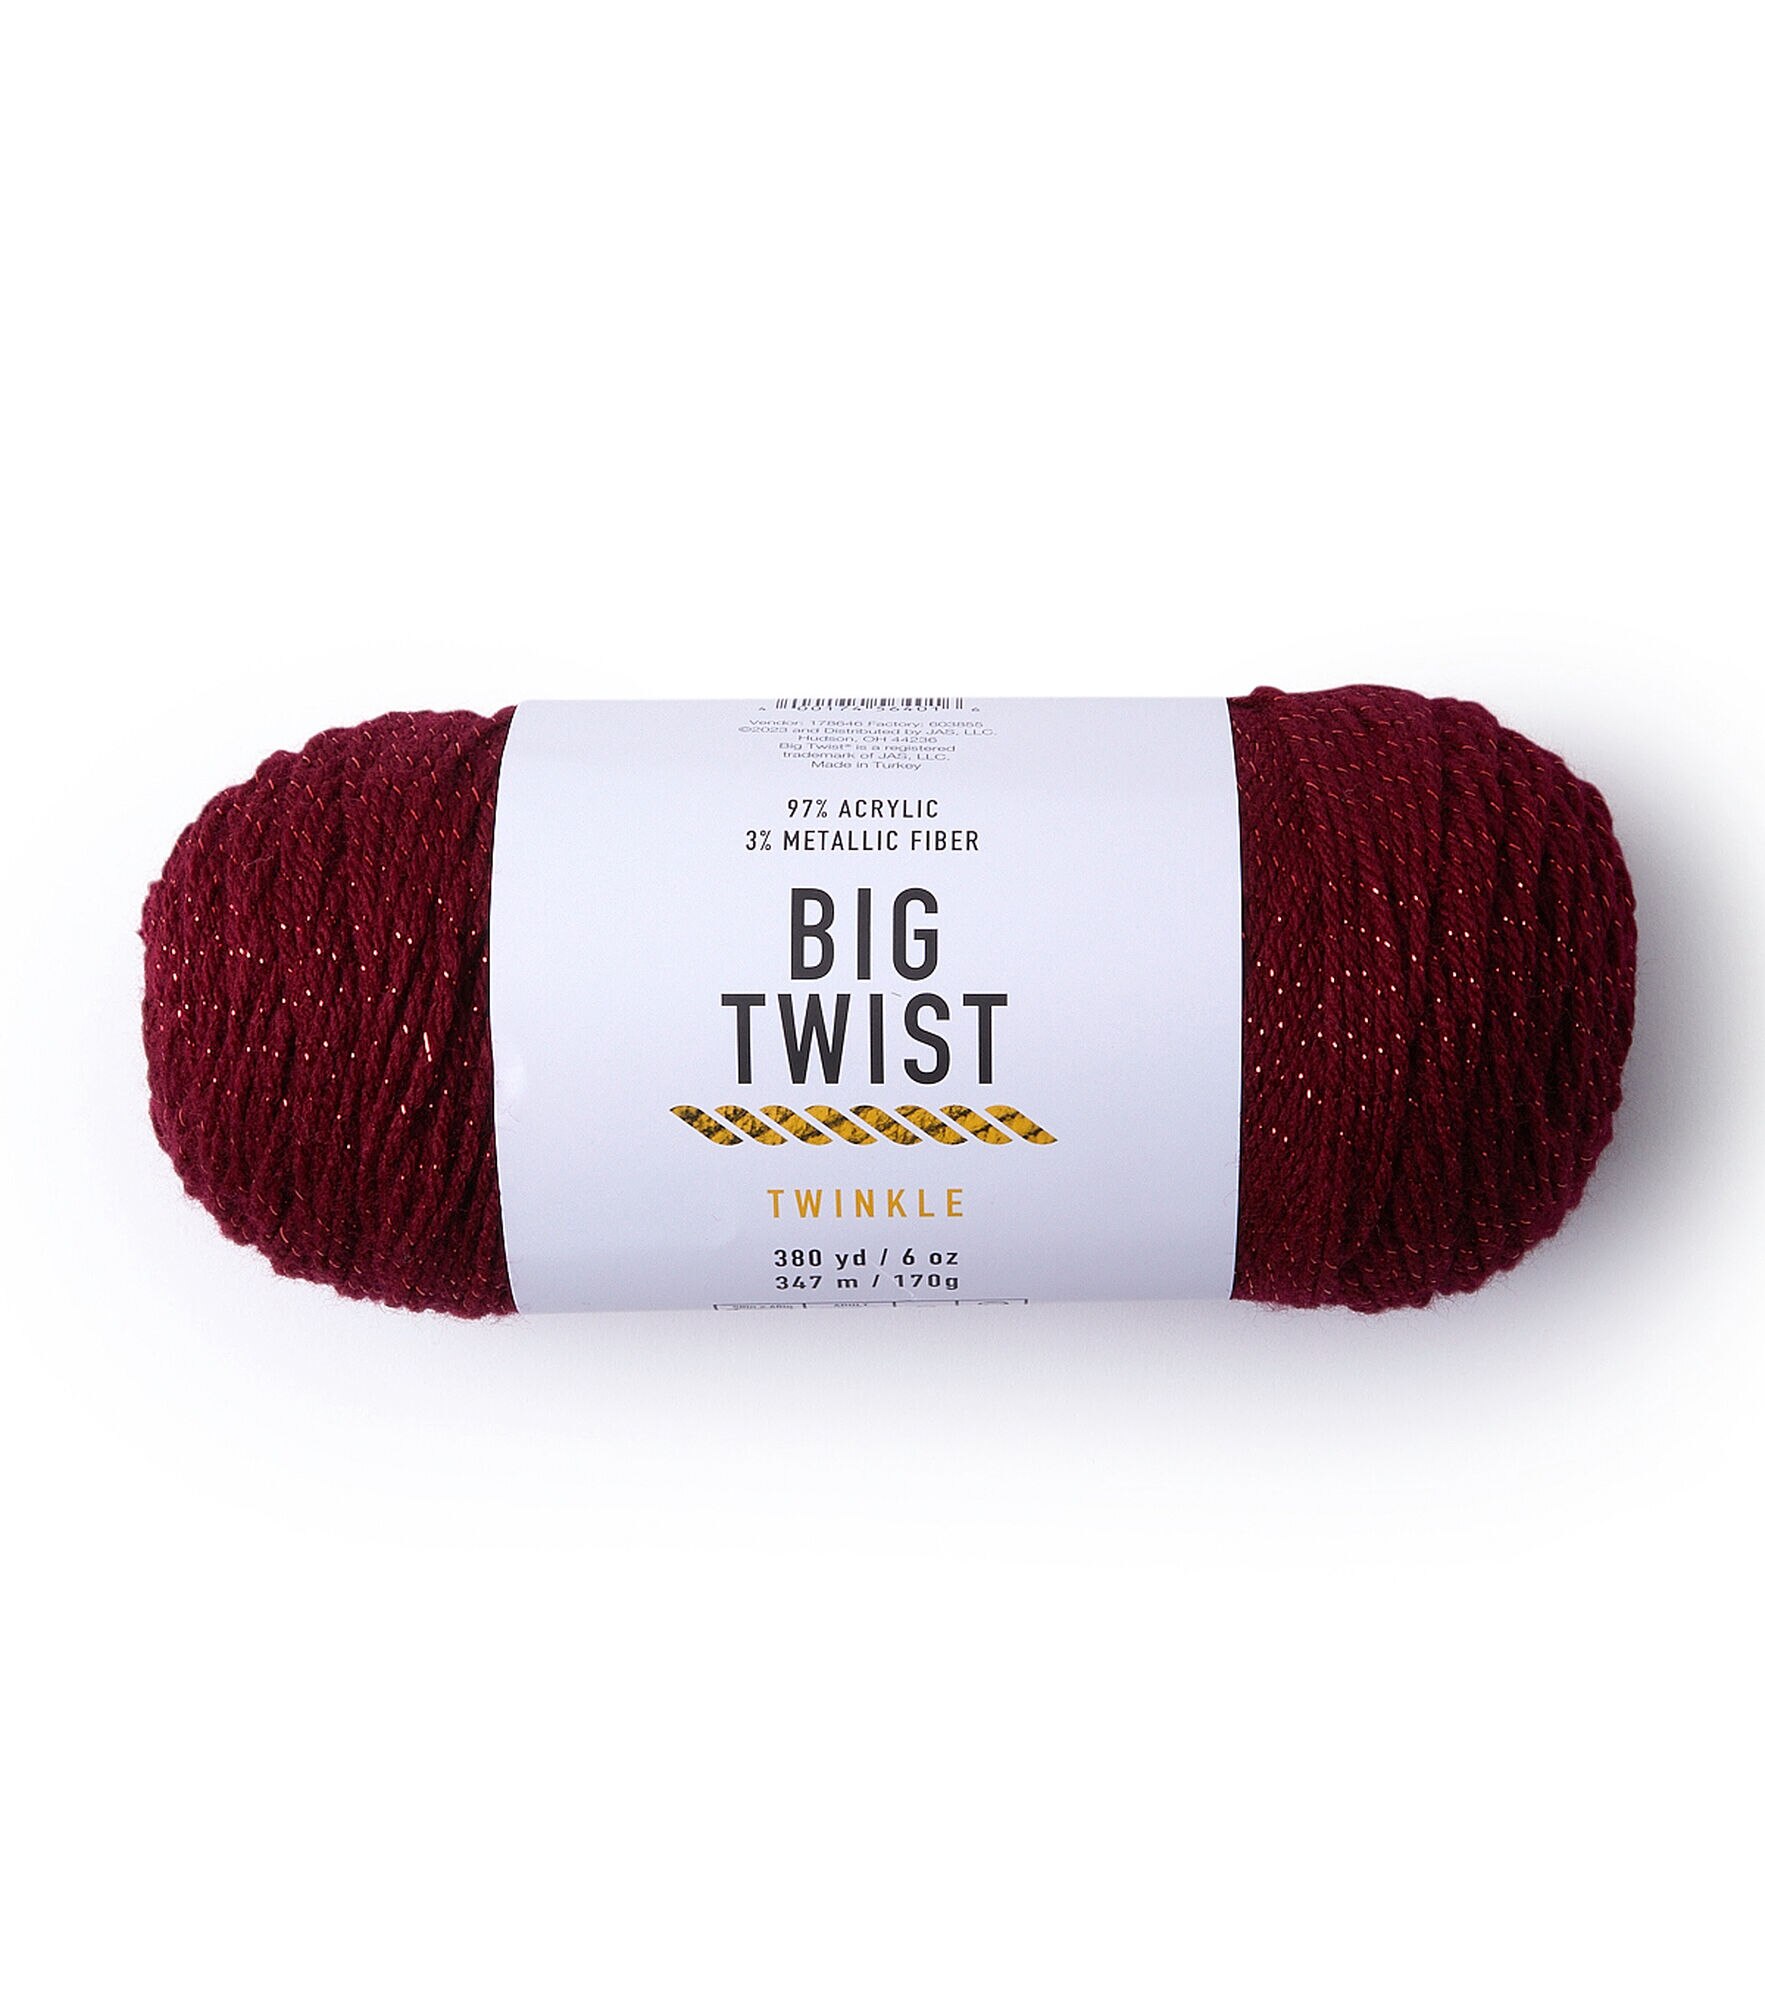 Twinkle 380yds Worsted Acrylic Blend Yarn by Big Twist, Mulberry, hi-res